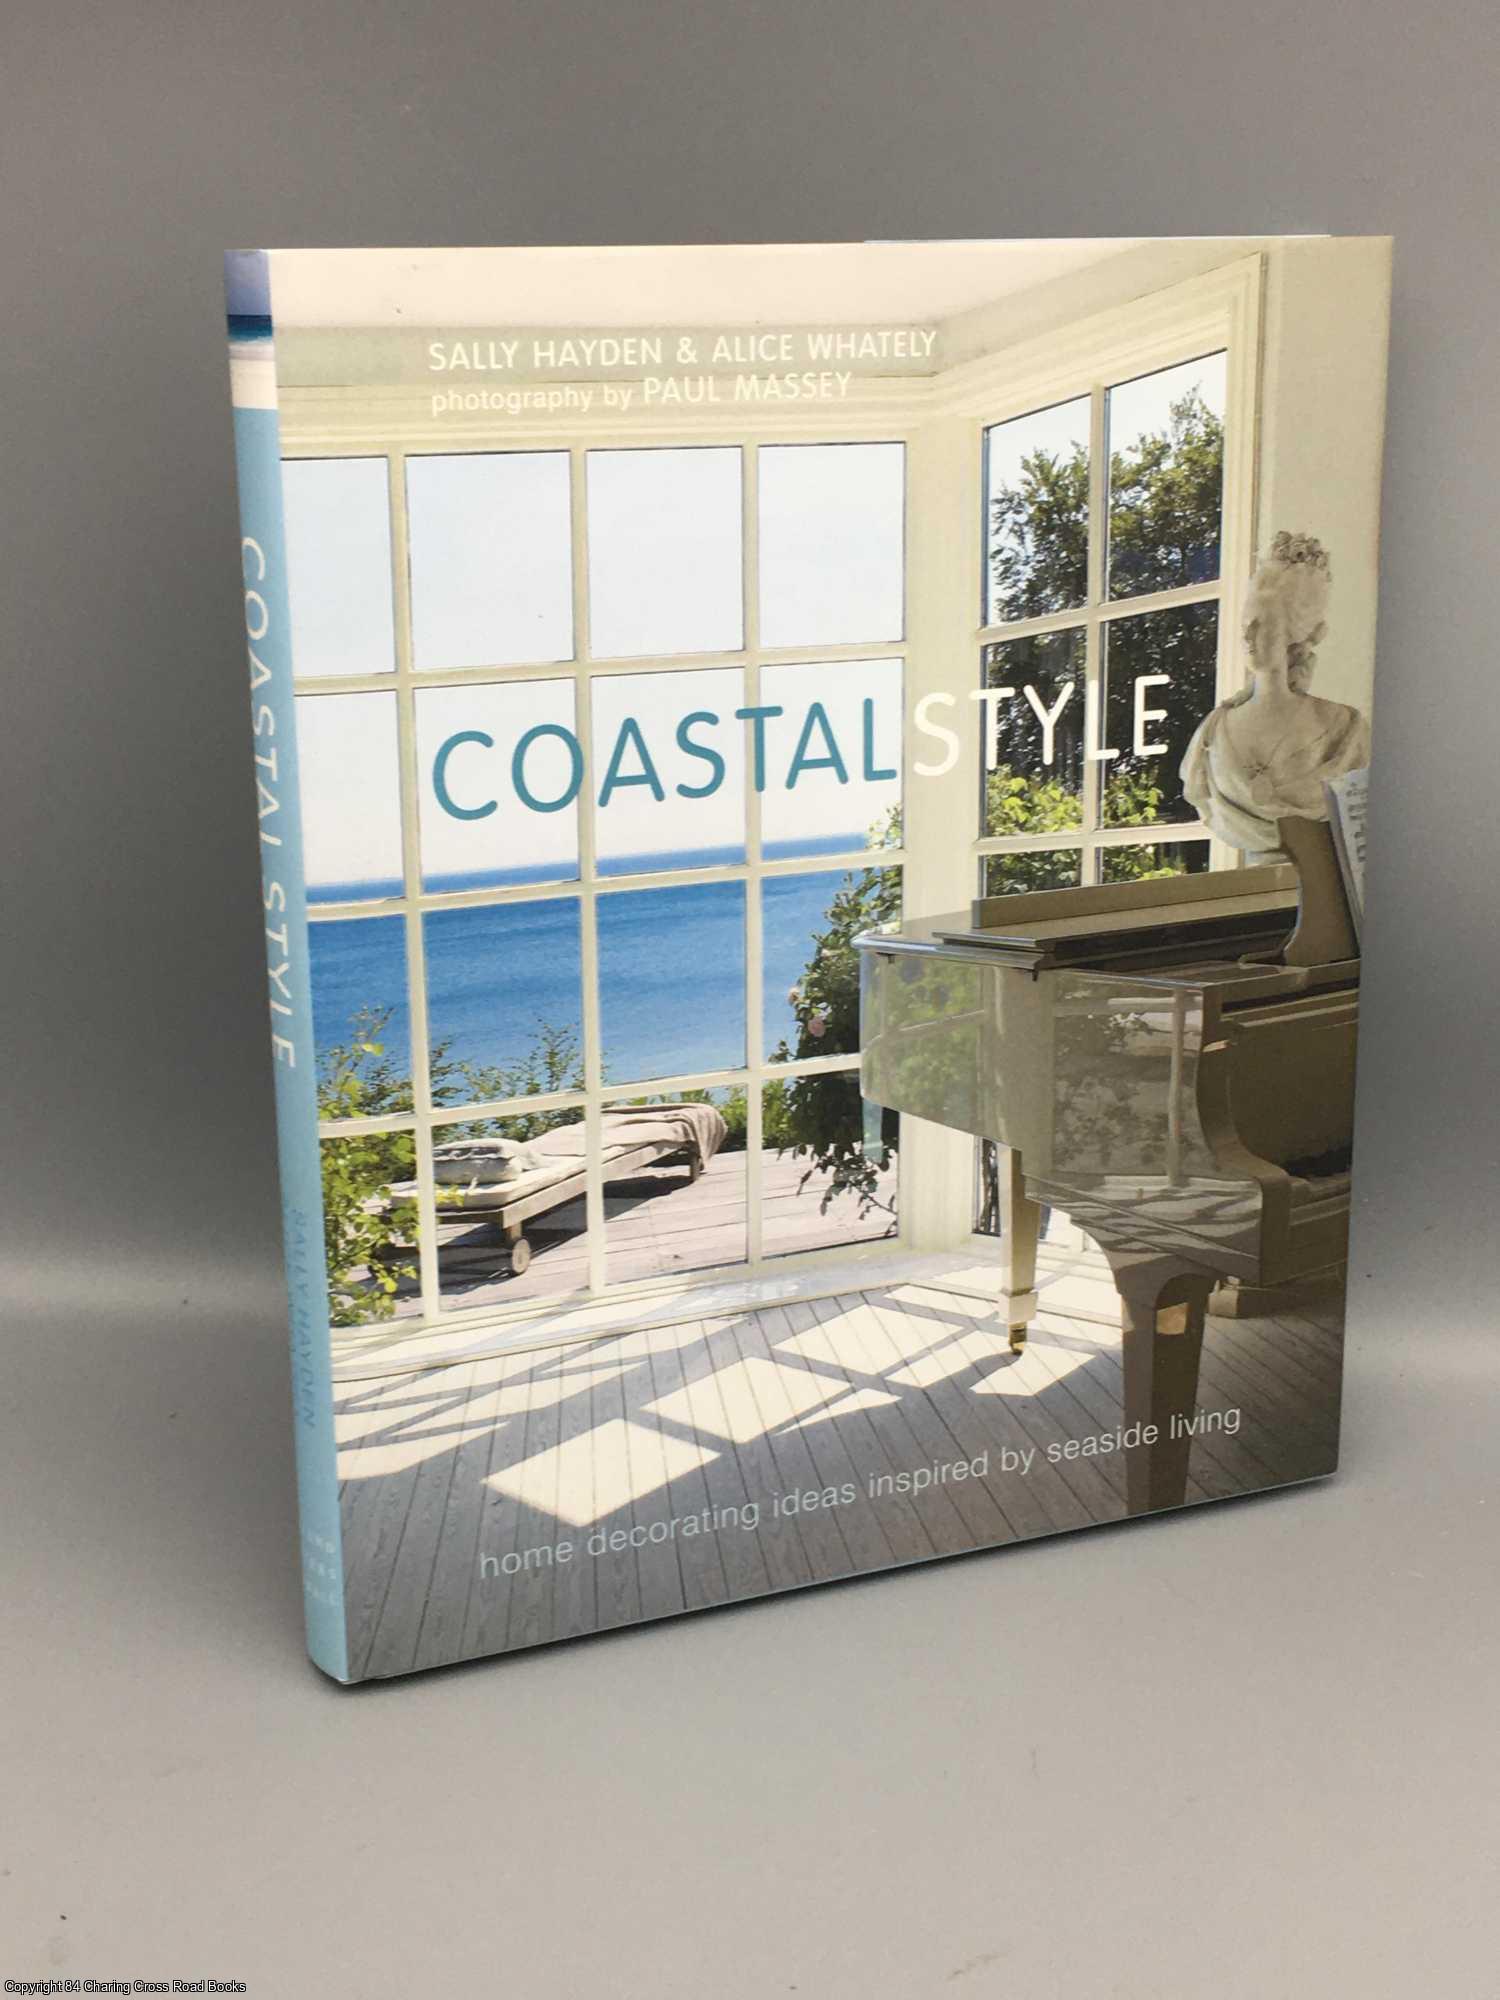 Hayden, Sally - Coastal Style: home decorating ideas inspired by seaside living